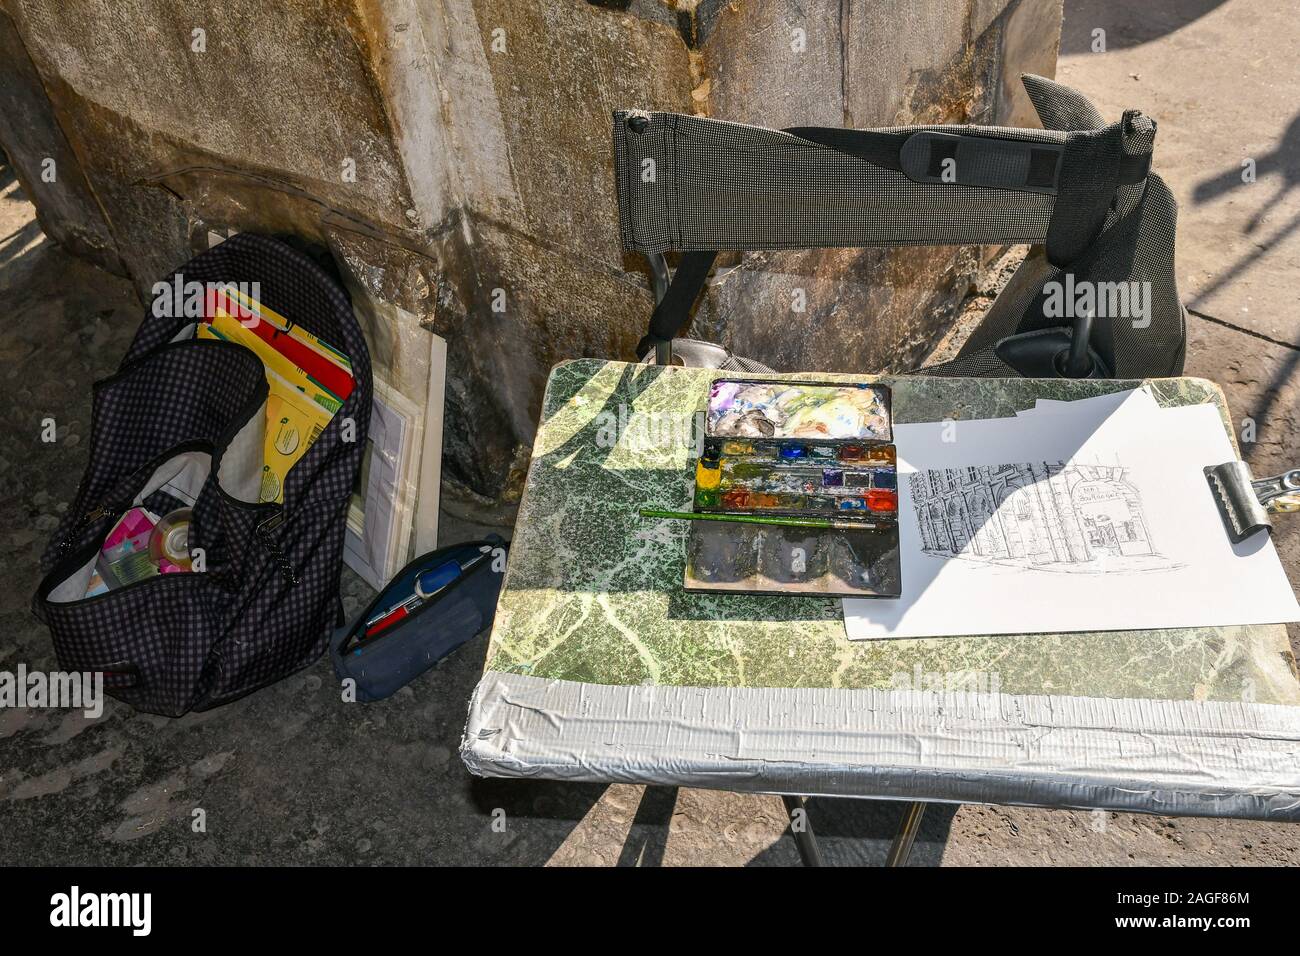 Close-up of street artist tools with a preparatory drawing and watercolors box on a folding chair under the arcade in Place des Vosges, Paris, France Stock Photo